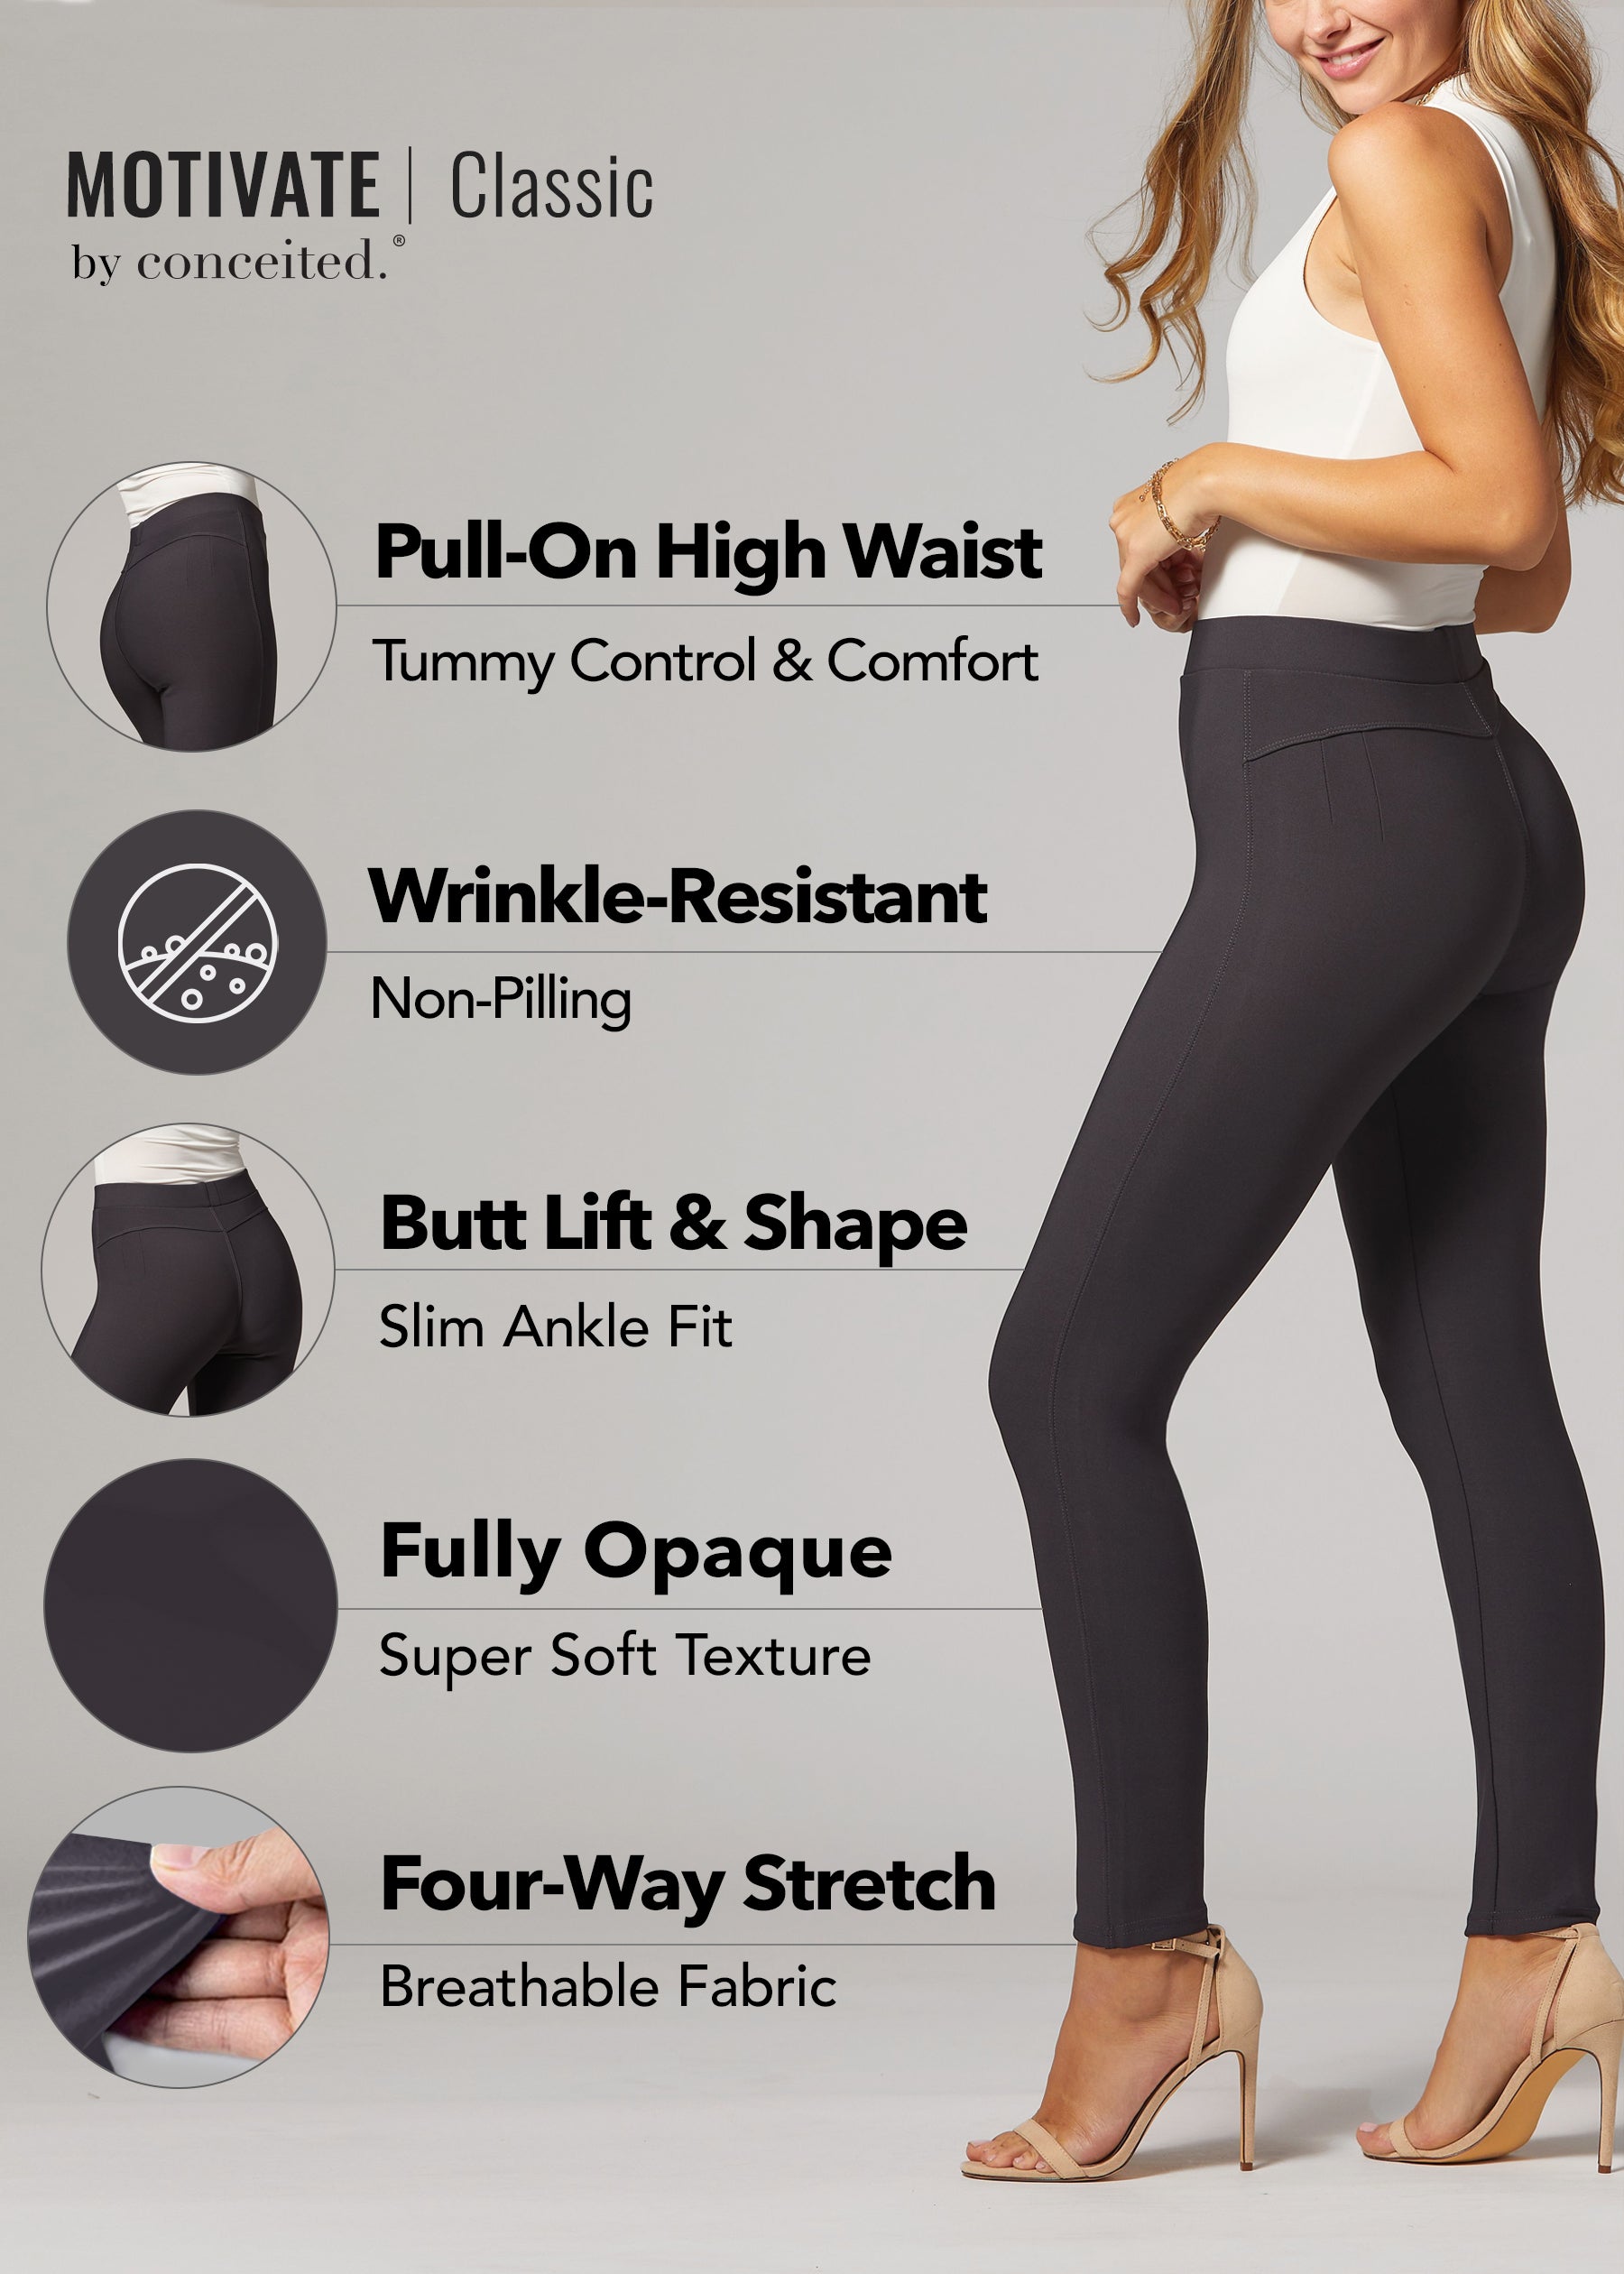 Conceited Premium Women's Stretch Ponte Pants - Dressy Leggings with Butt  Lift - Black - Small-Medium at  Women's Clothing store